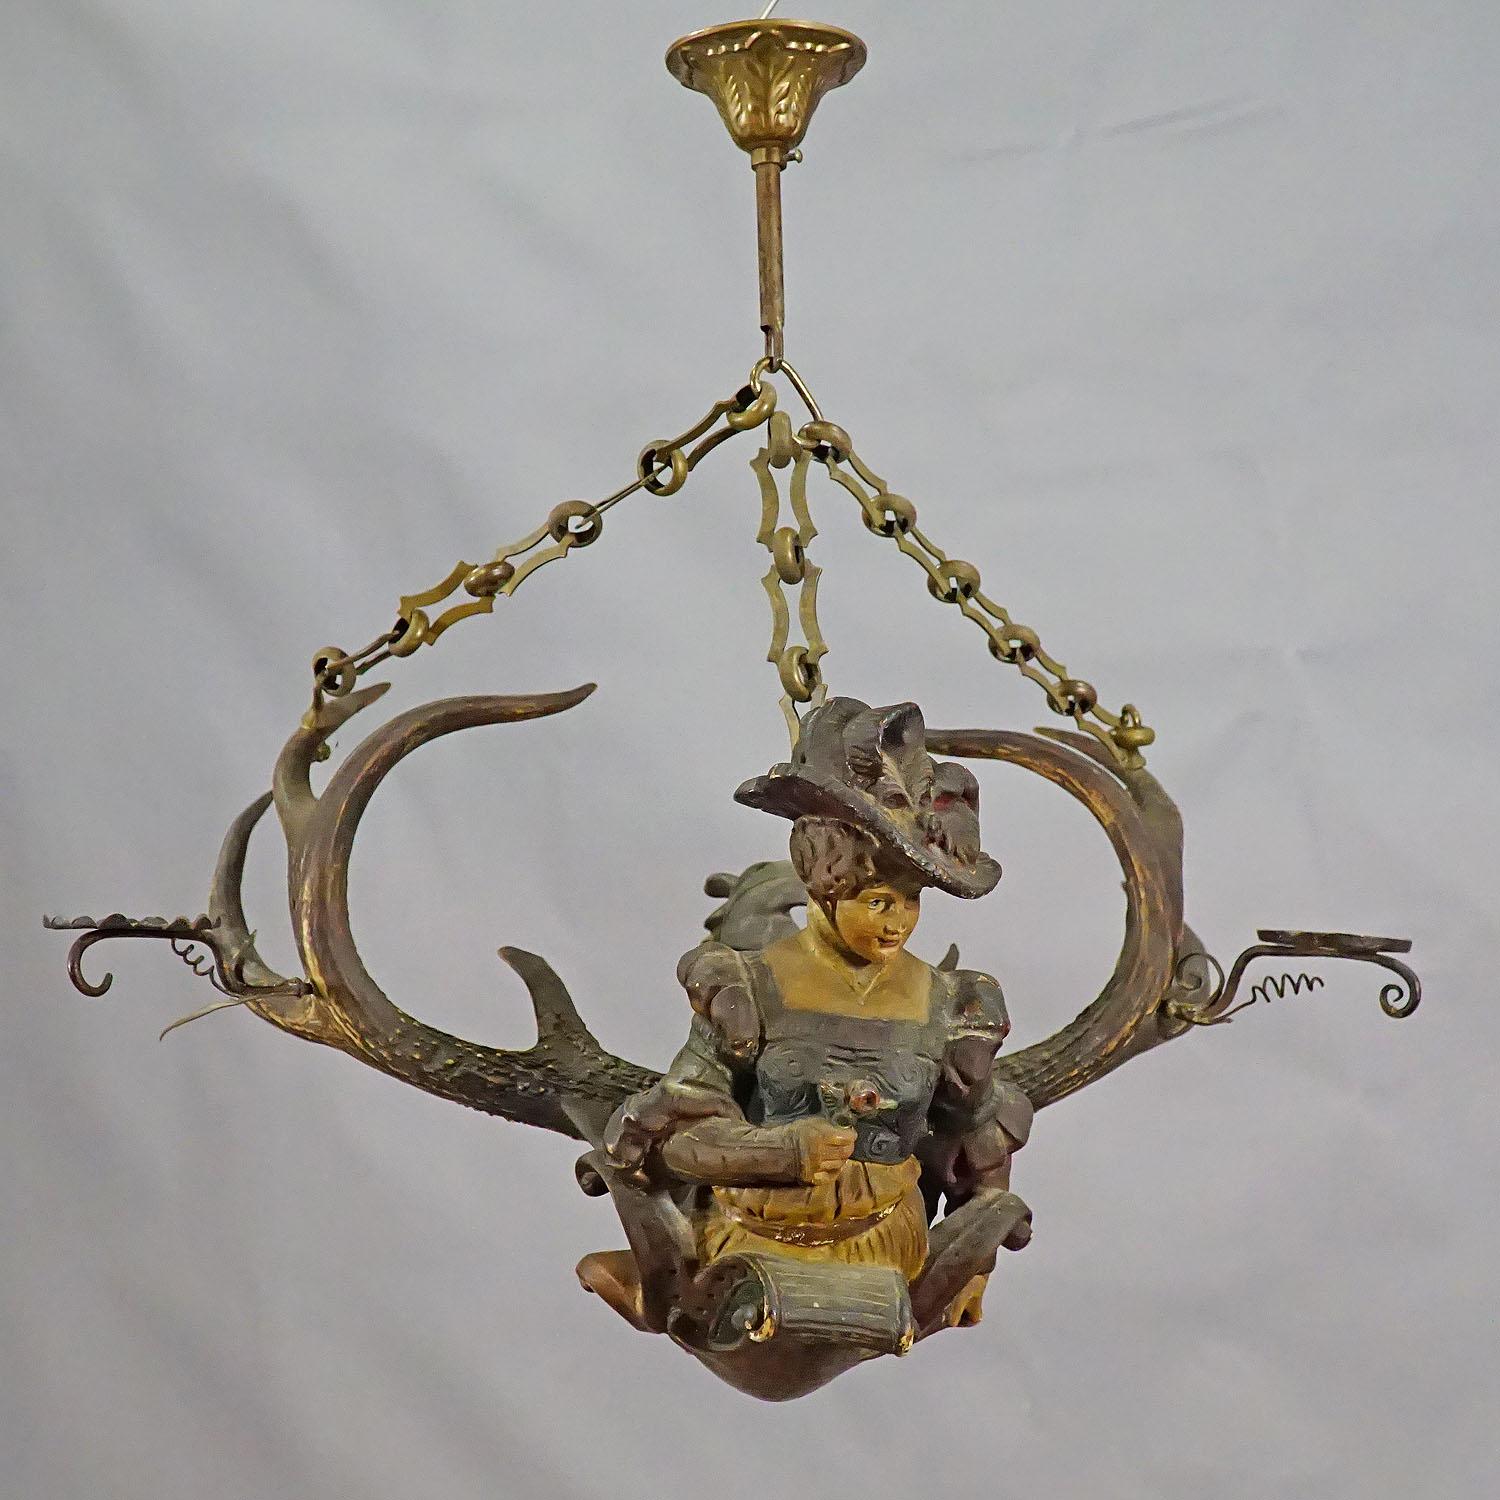 A rare antique lüsterweibchen chandelier with a plaster sculpture of a Victorian lady with original Virginia deer antlers and 2 iron spouts for candles. Executed circa 1900.

Measures: Length 16.54